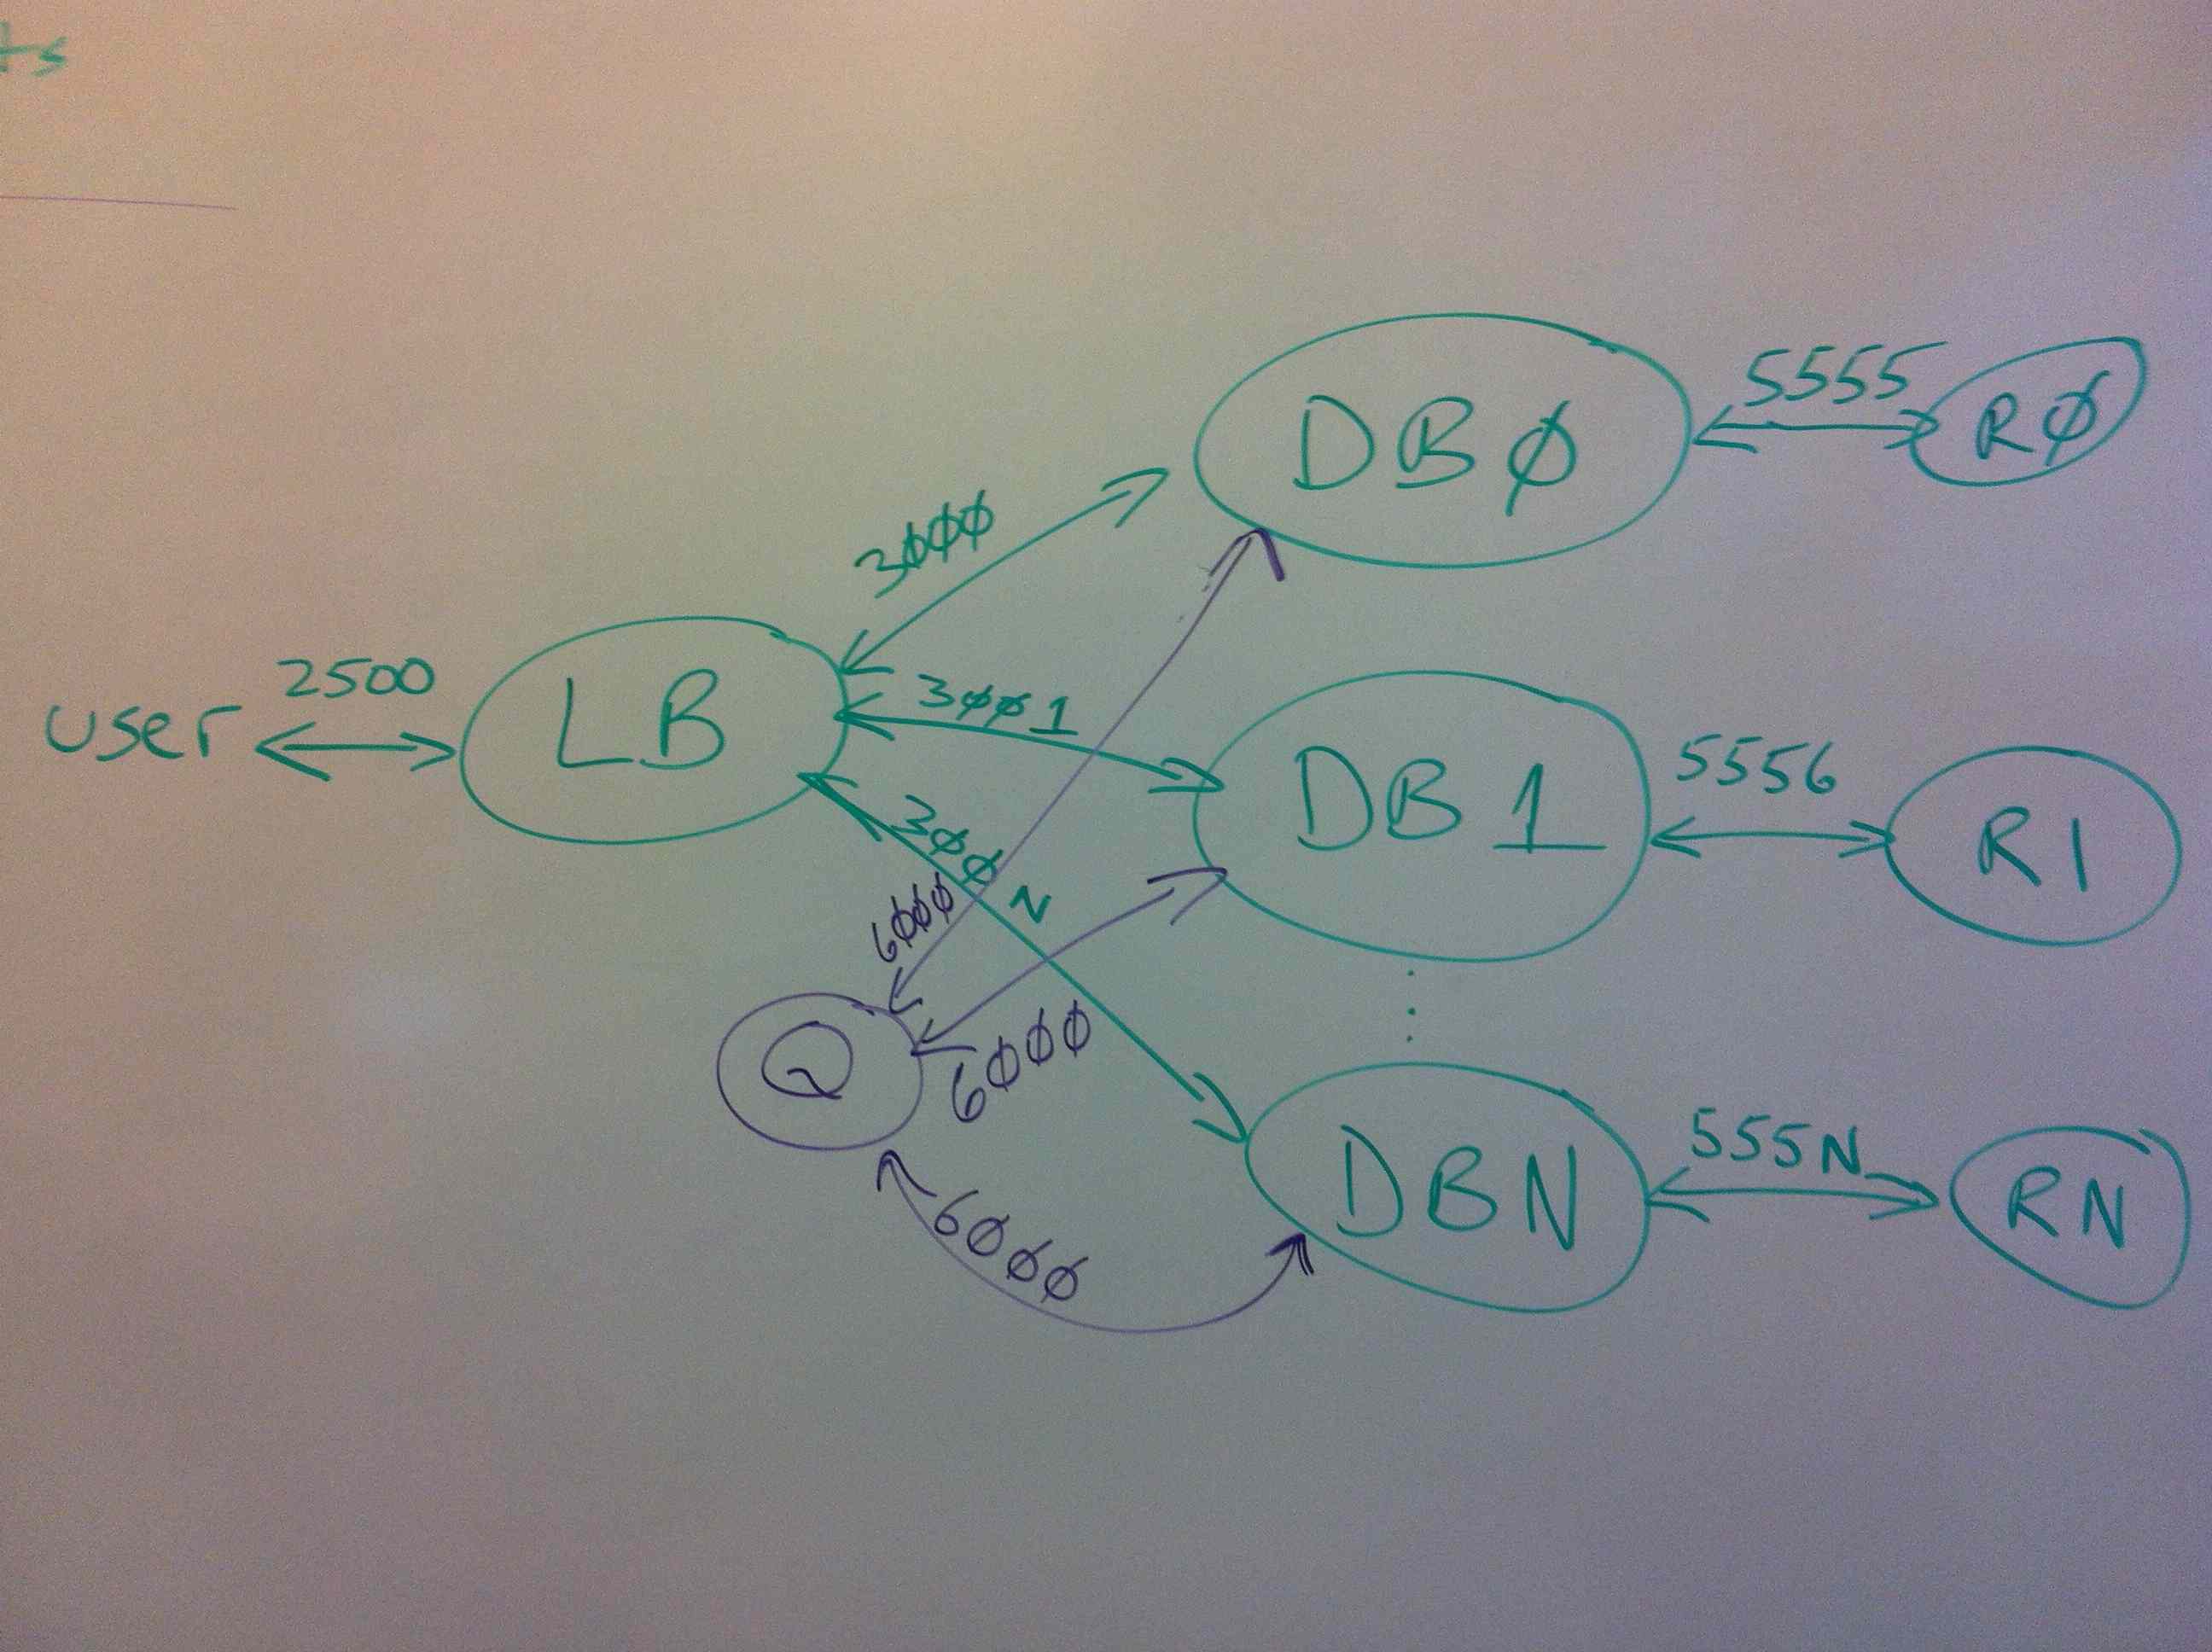 Architecture, showing user, single LB, single Q, N DBs, and N Rs